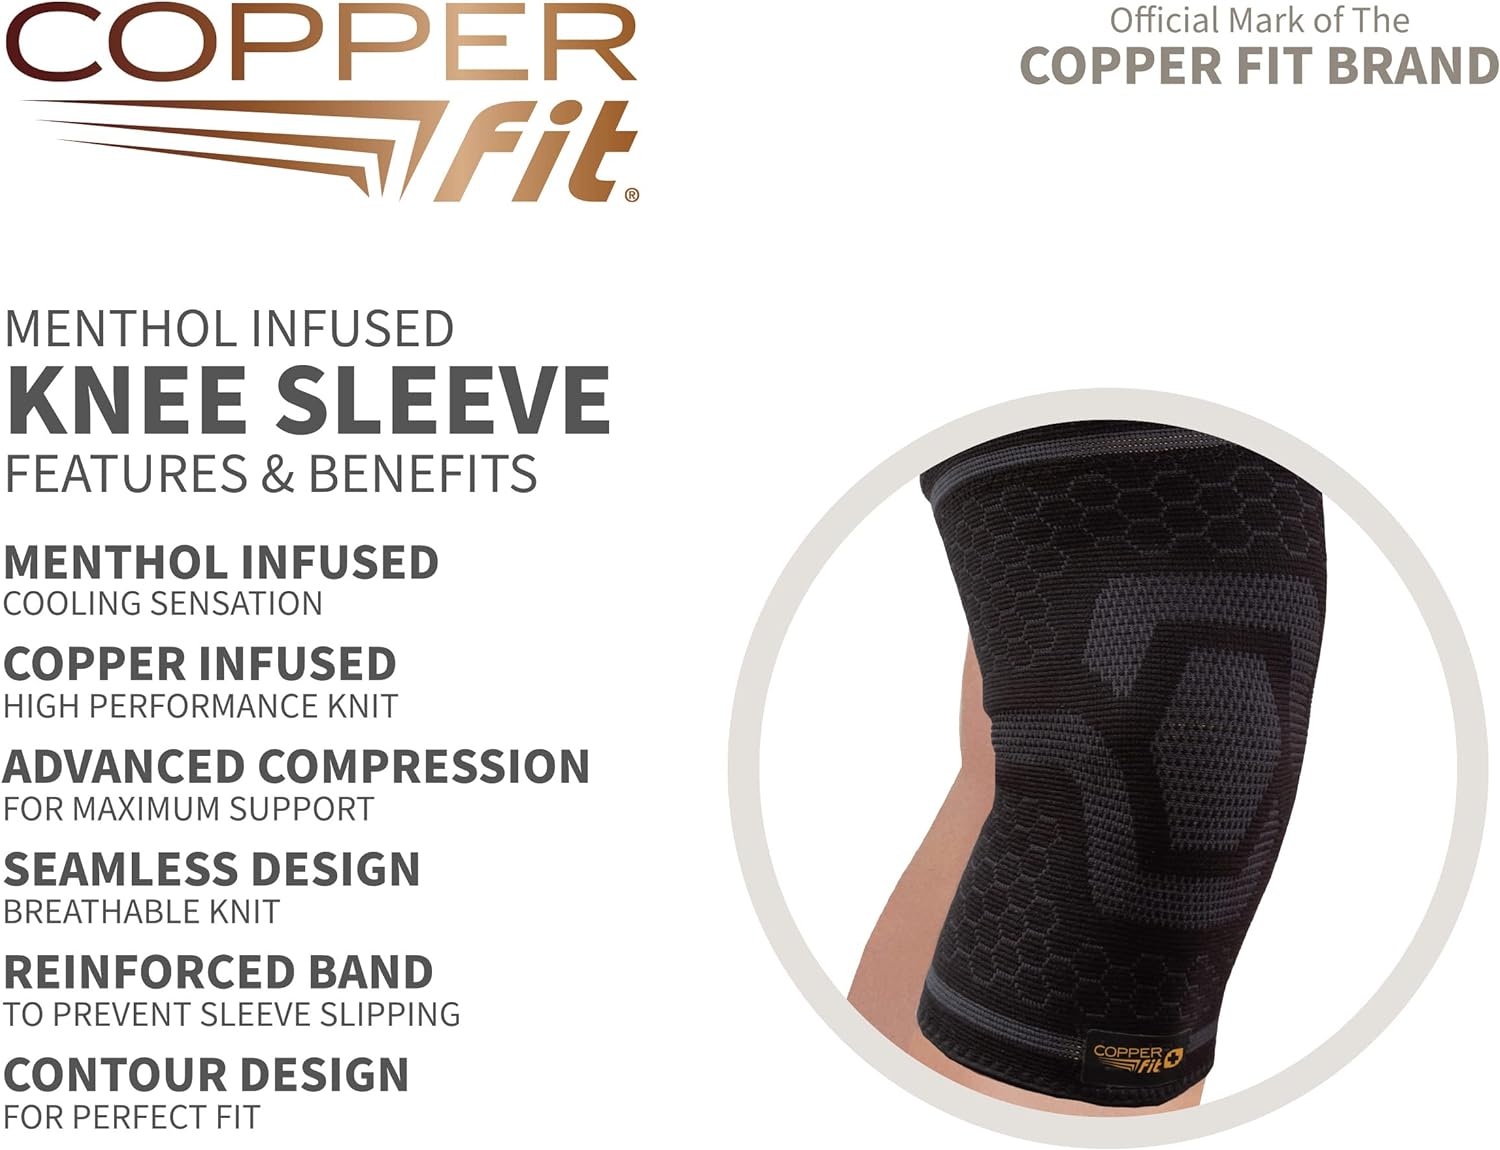 Copper Fit ICE Knee Compression Sleeve Infused with Menthol Review